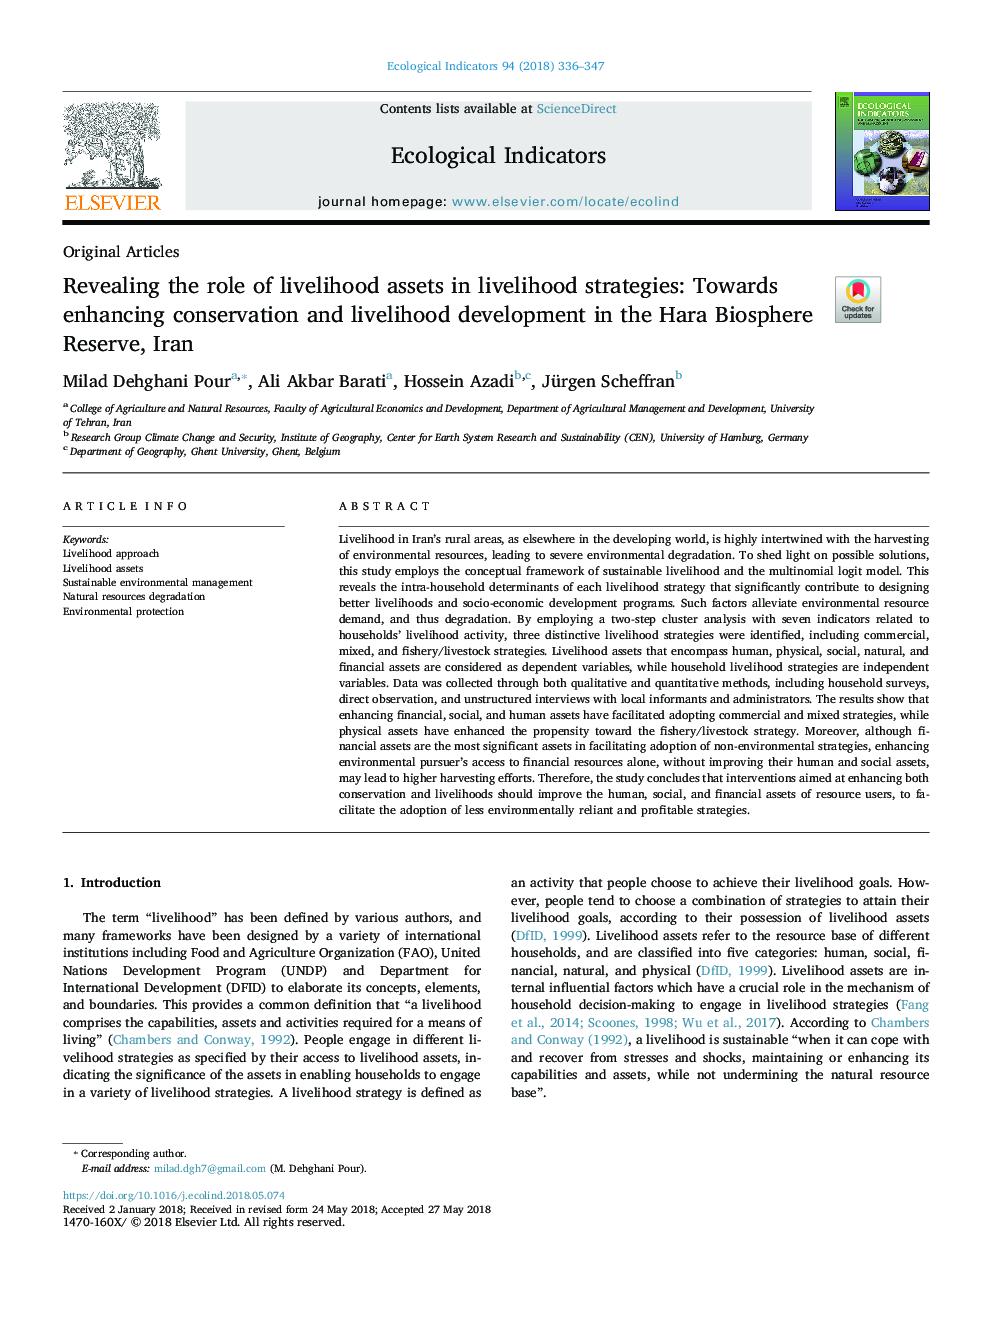 Revealing the role of livelihood assets in livelihood strategies: Towards enhancing conservation and livelihood development in the Hara Biosphere Reserve, Iran